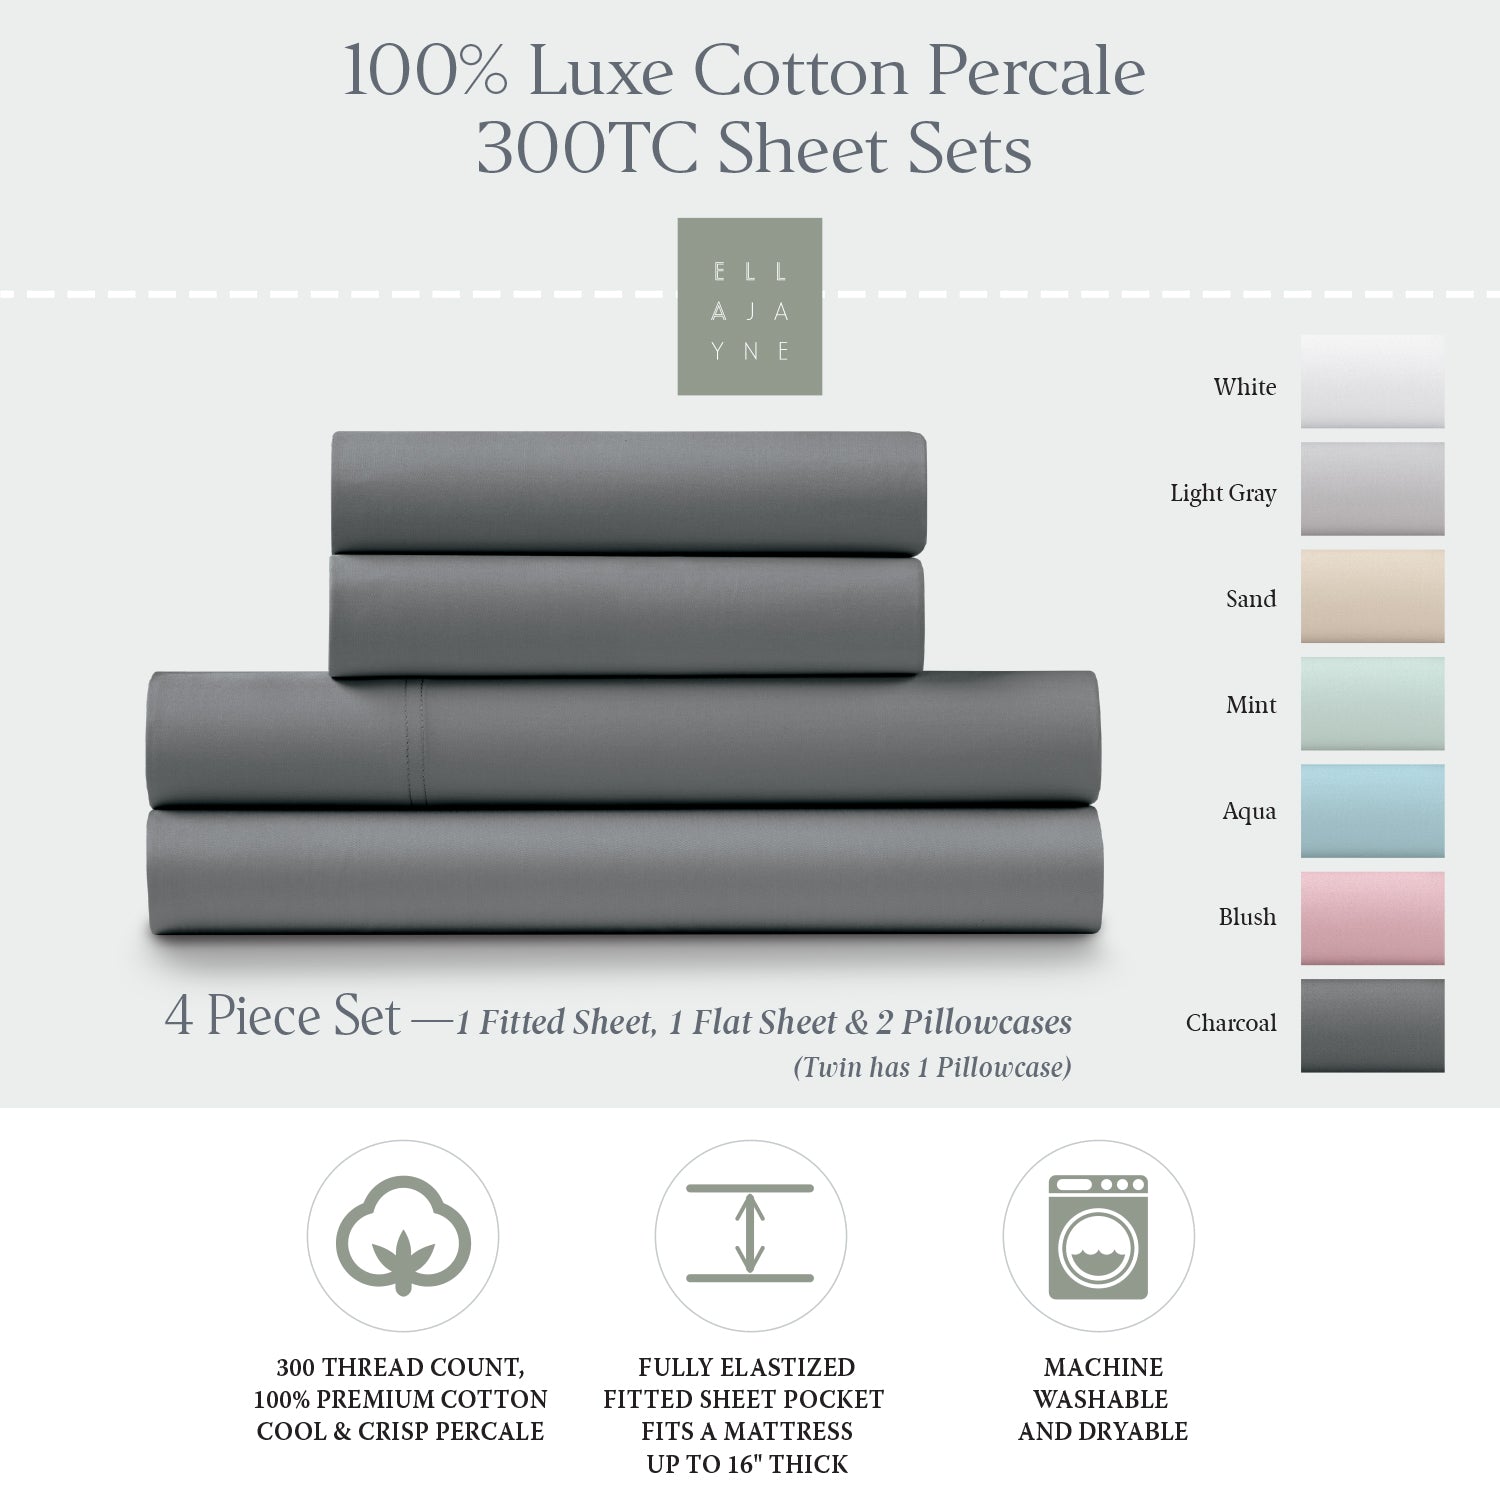 Introducing: Thick and Crisp Heavy Cotton Sheets - The Good Sheet